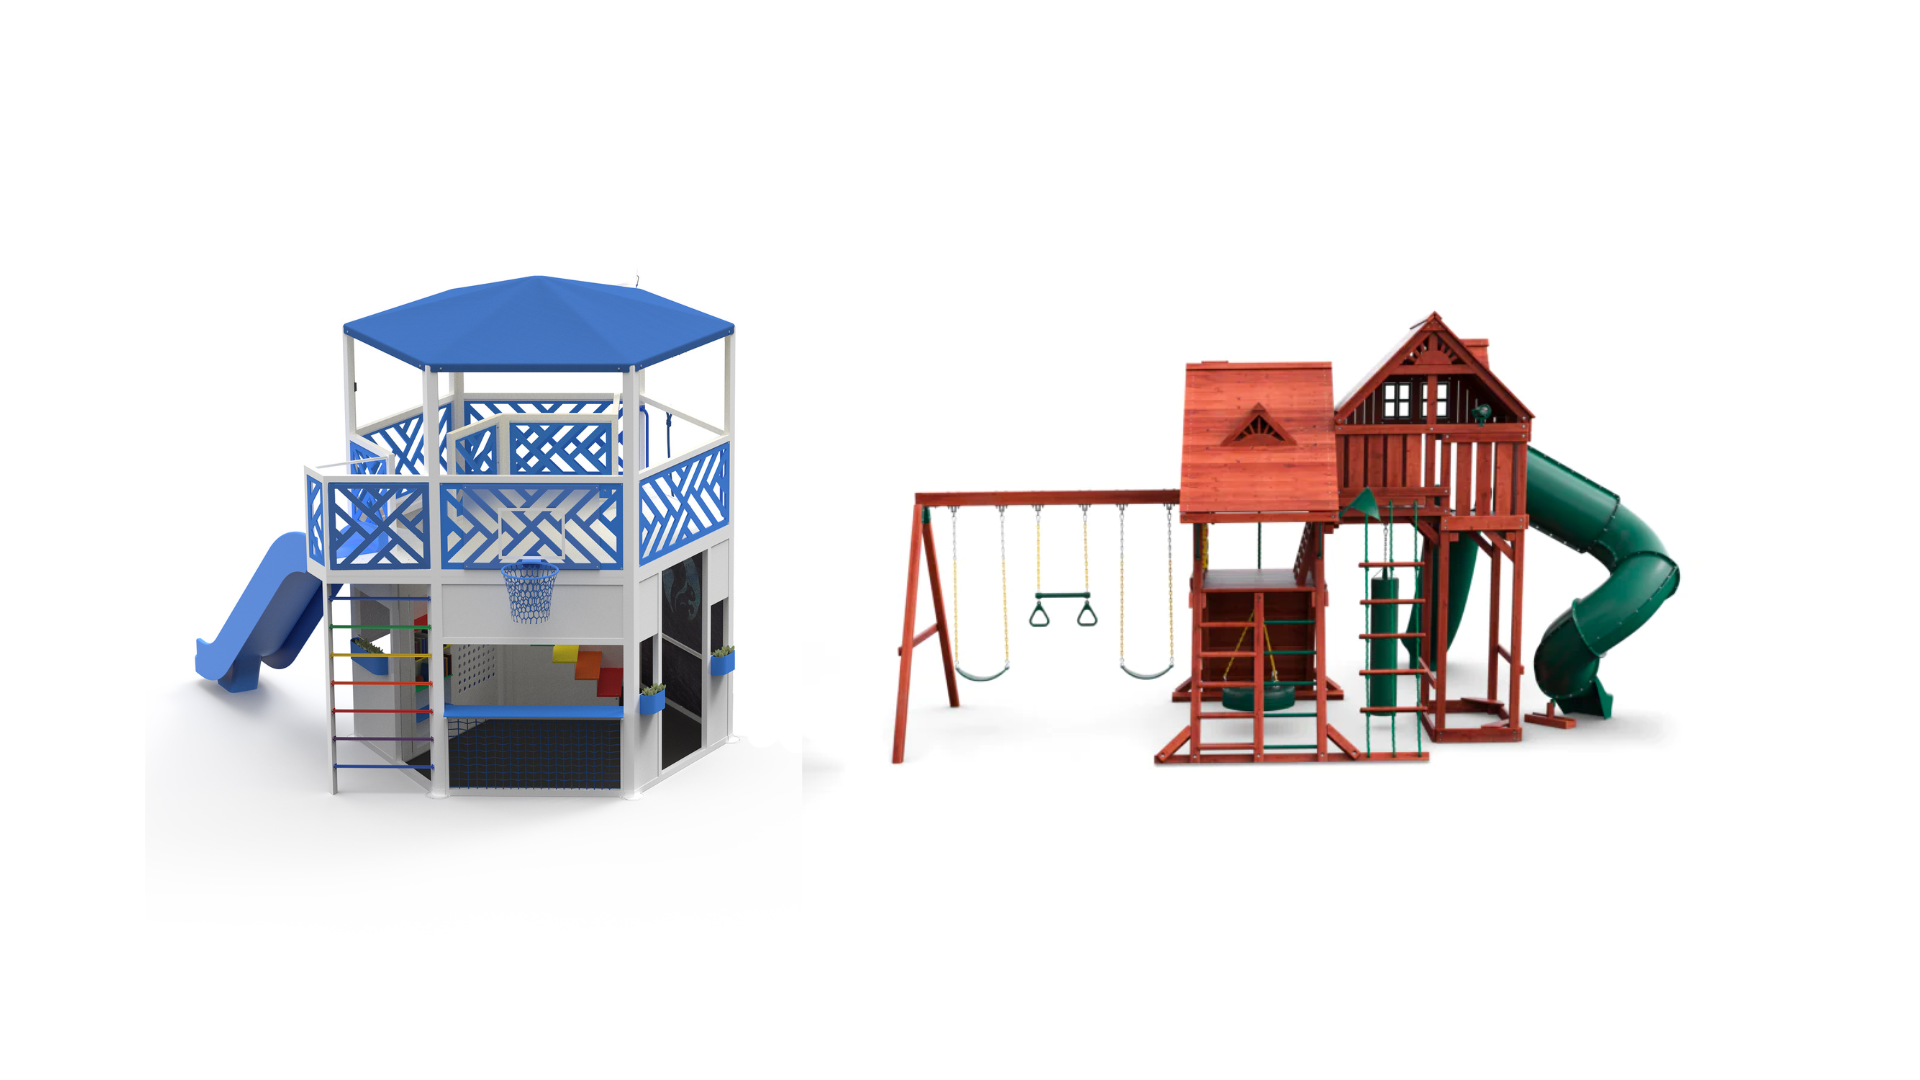 Image of the blue squirrel playhouse